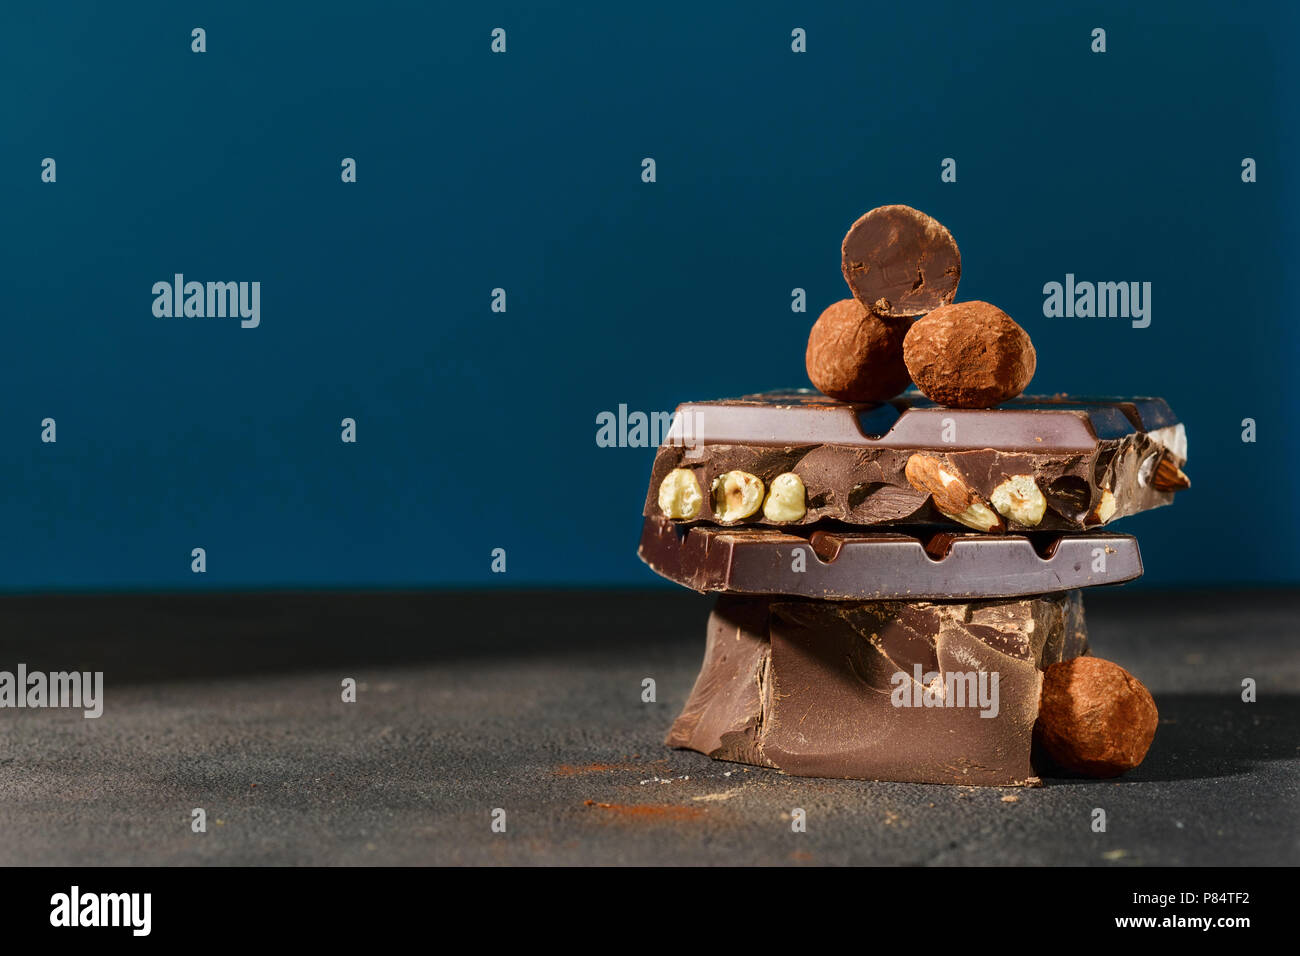 Dark chocolate stack and truffle chocolates on blue background with copy space Stock Photo